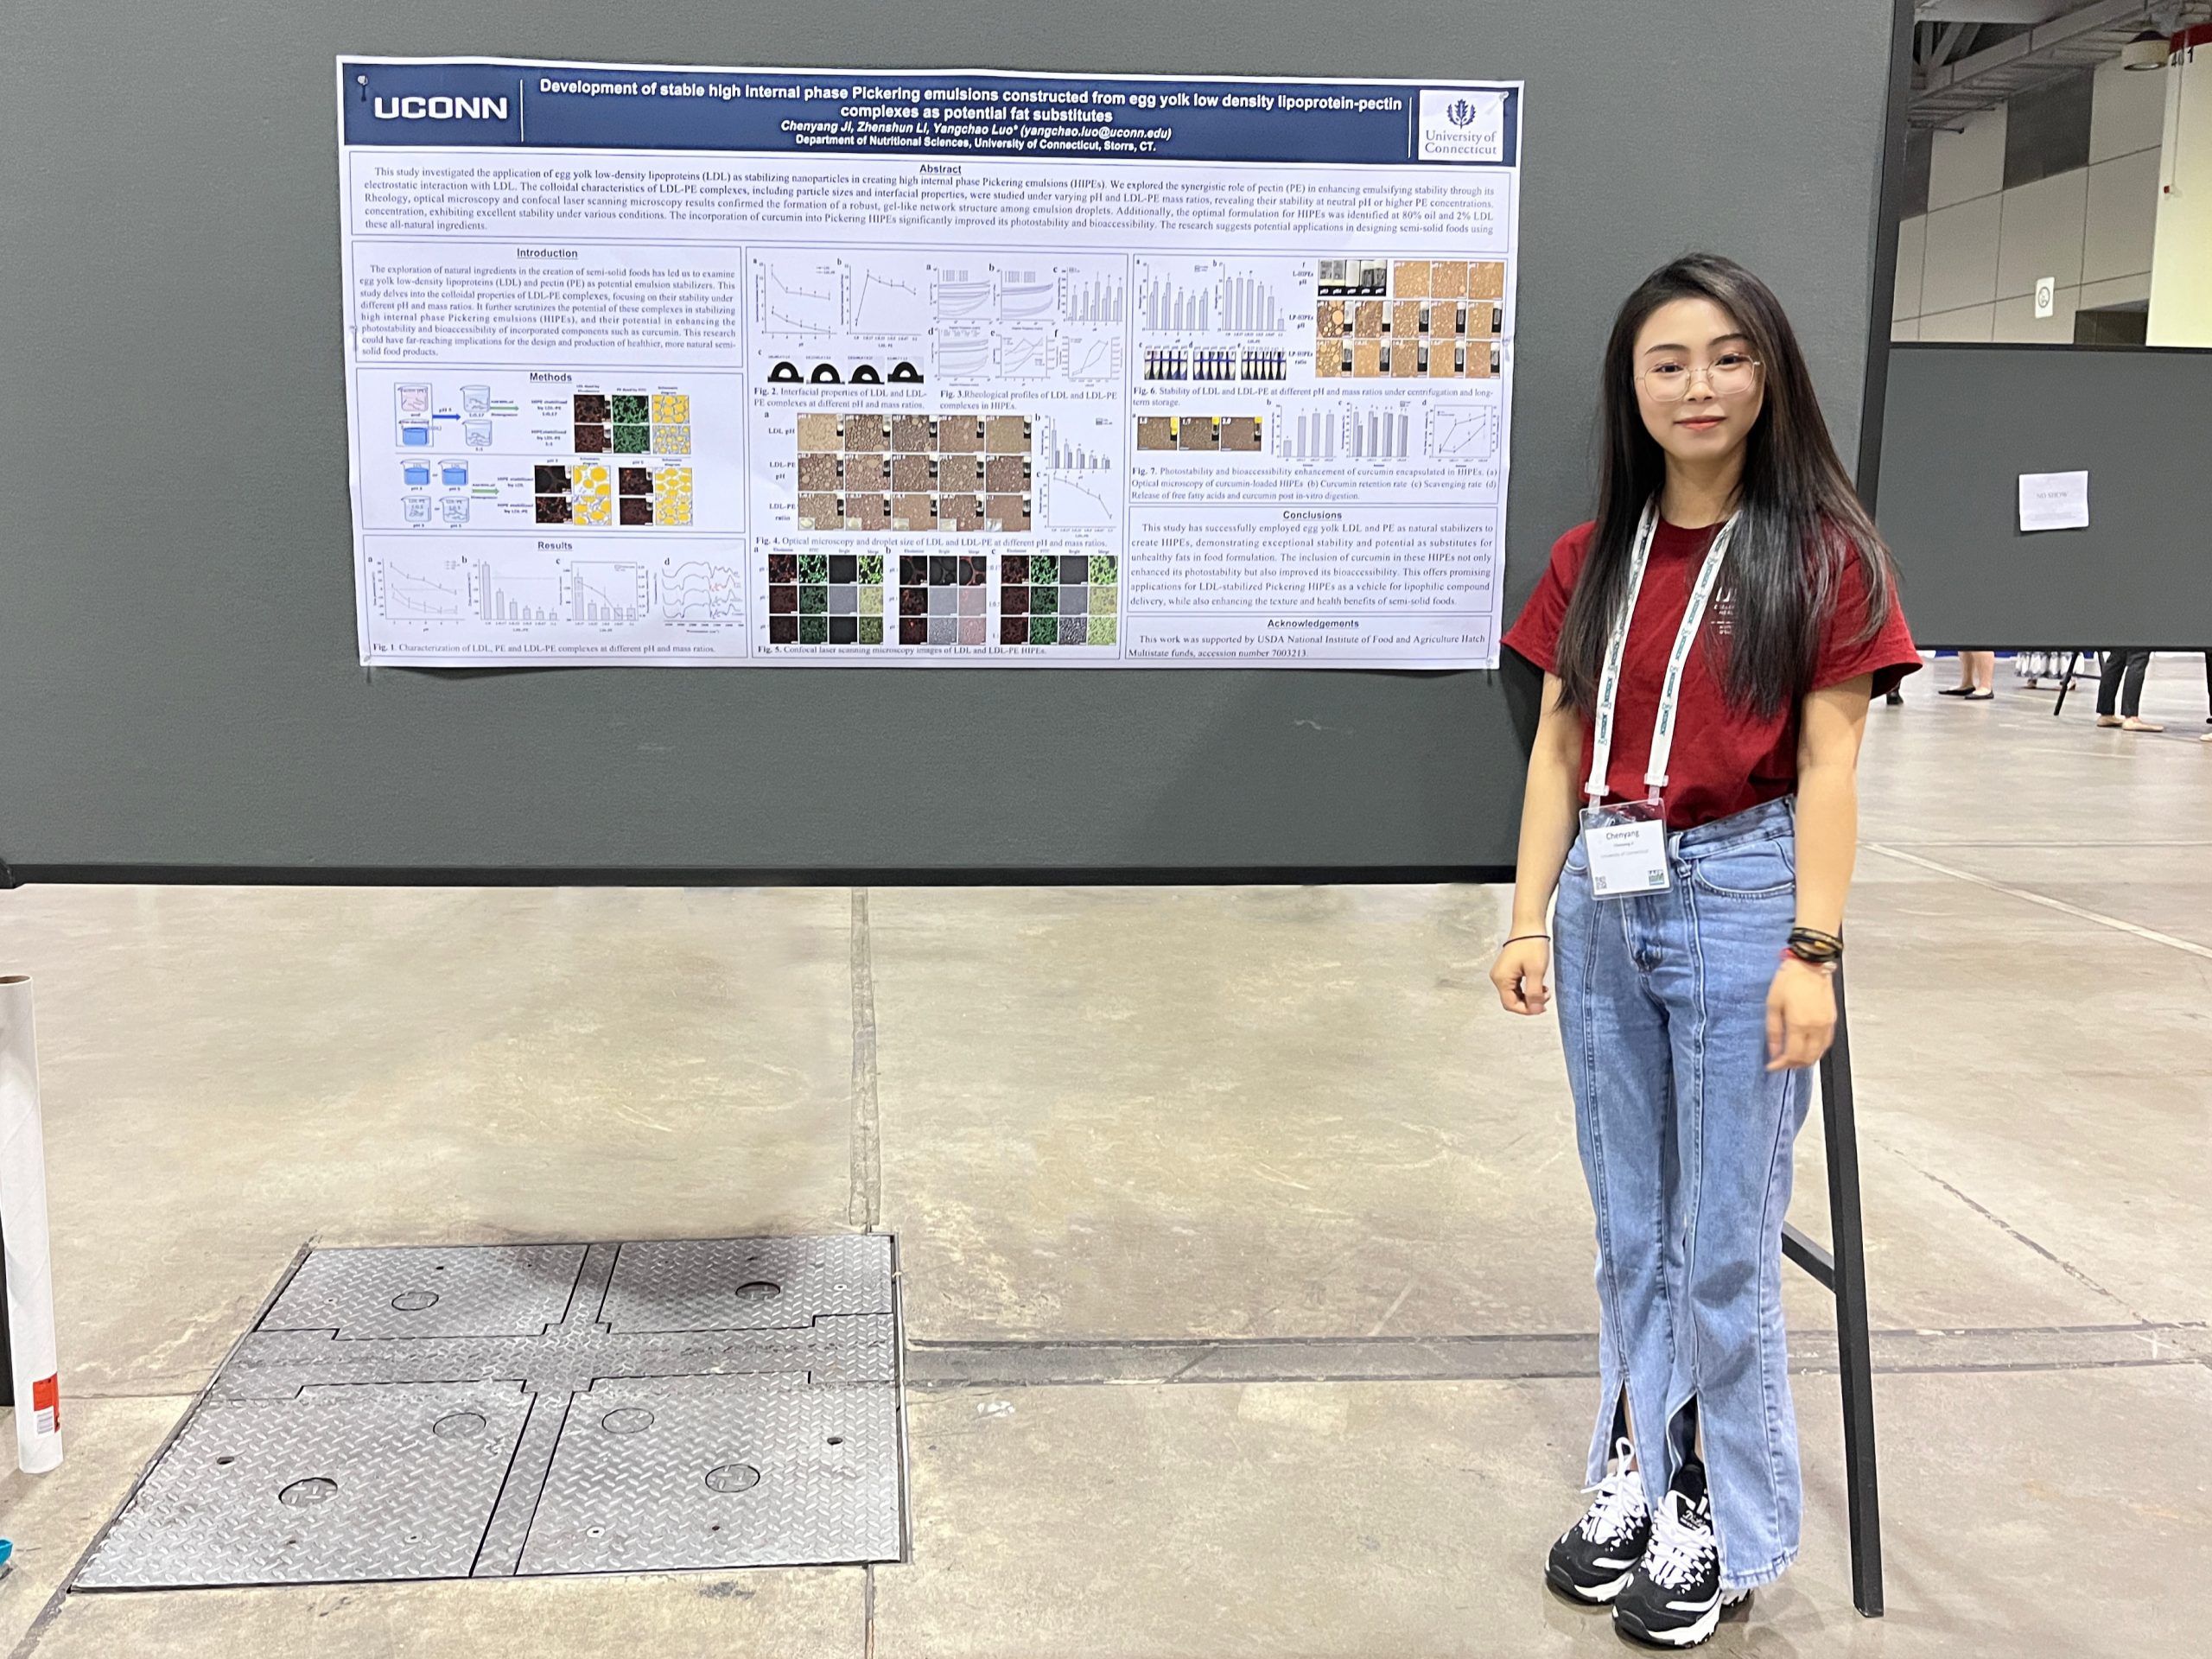 Chenyang presenting her poster